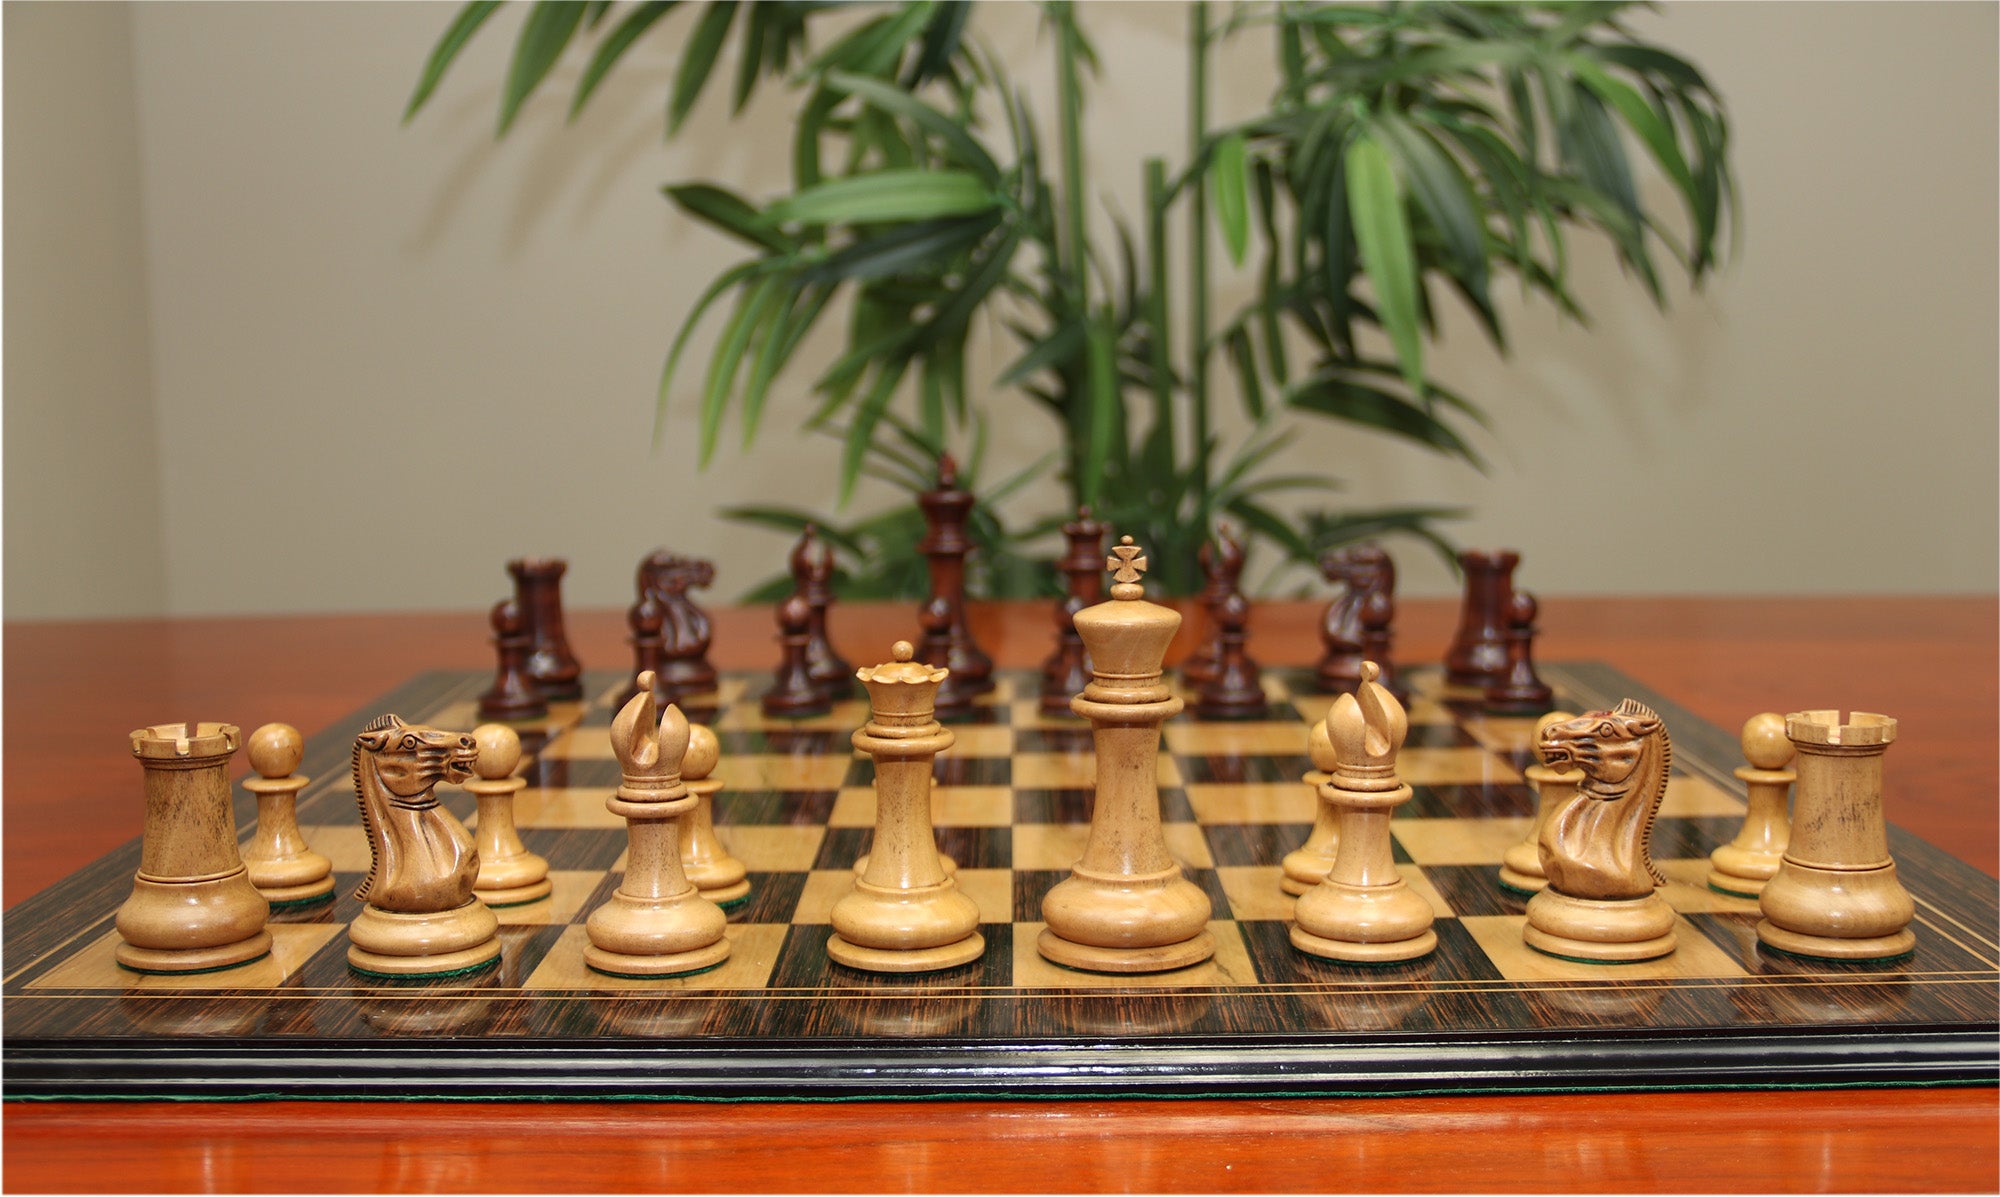 Jaques Reproduction 1870-75 Wooden Chess Pieces in Distressed and Mahogany Boxwood